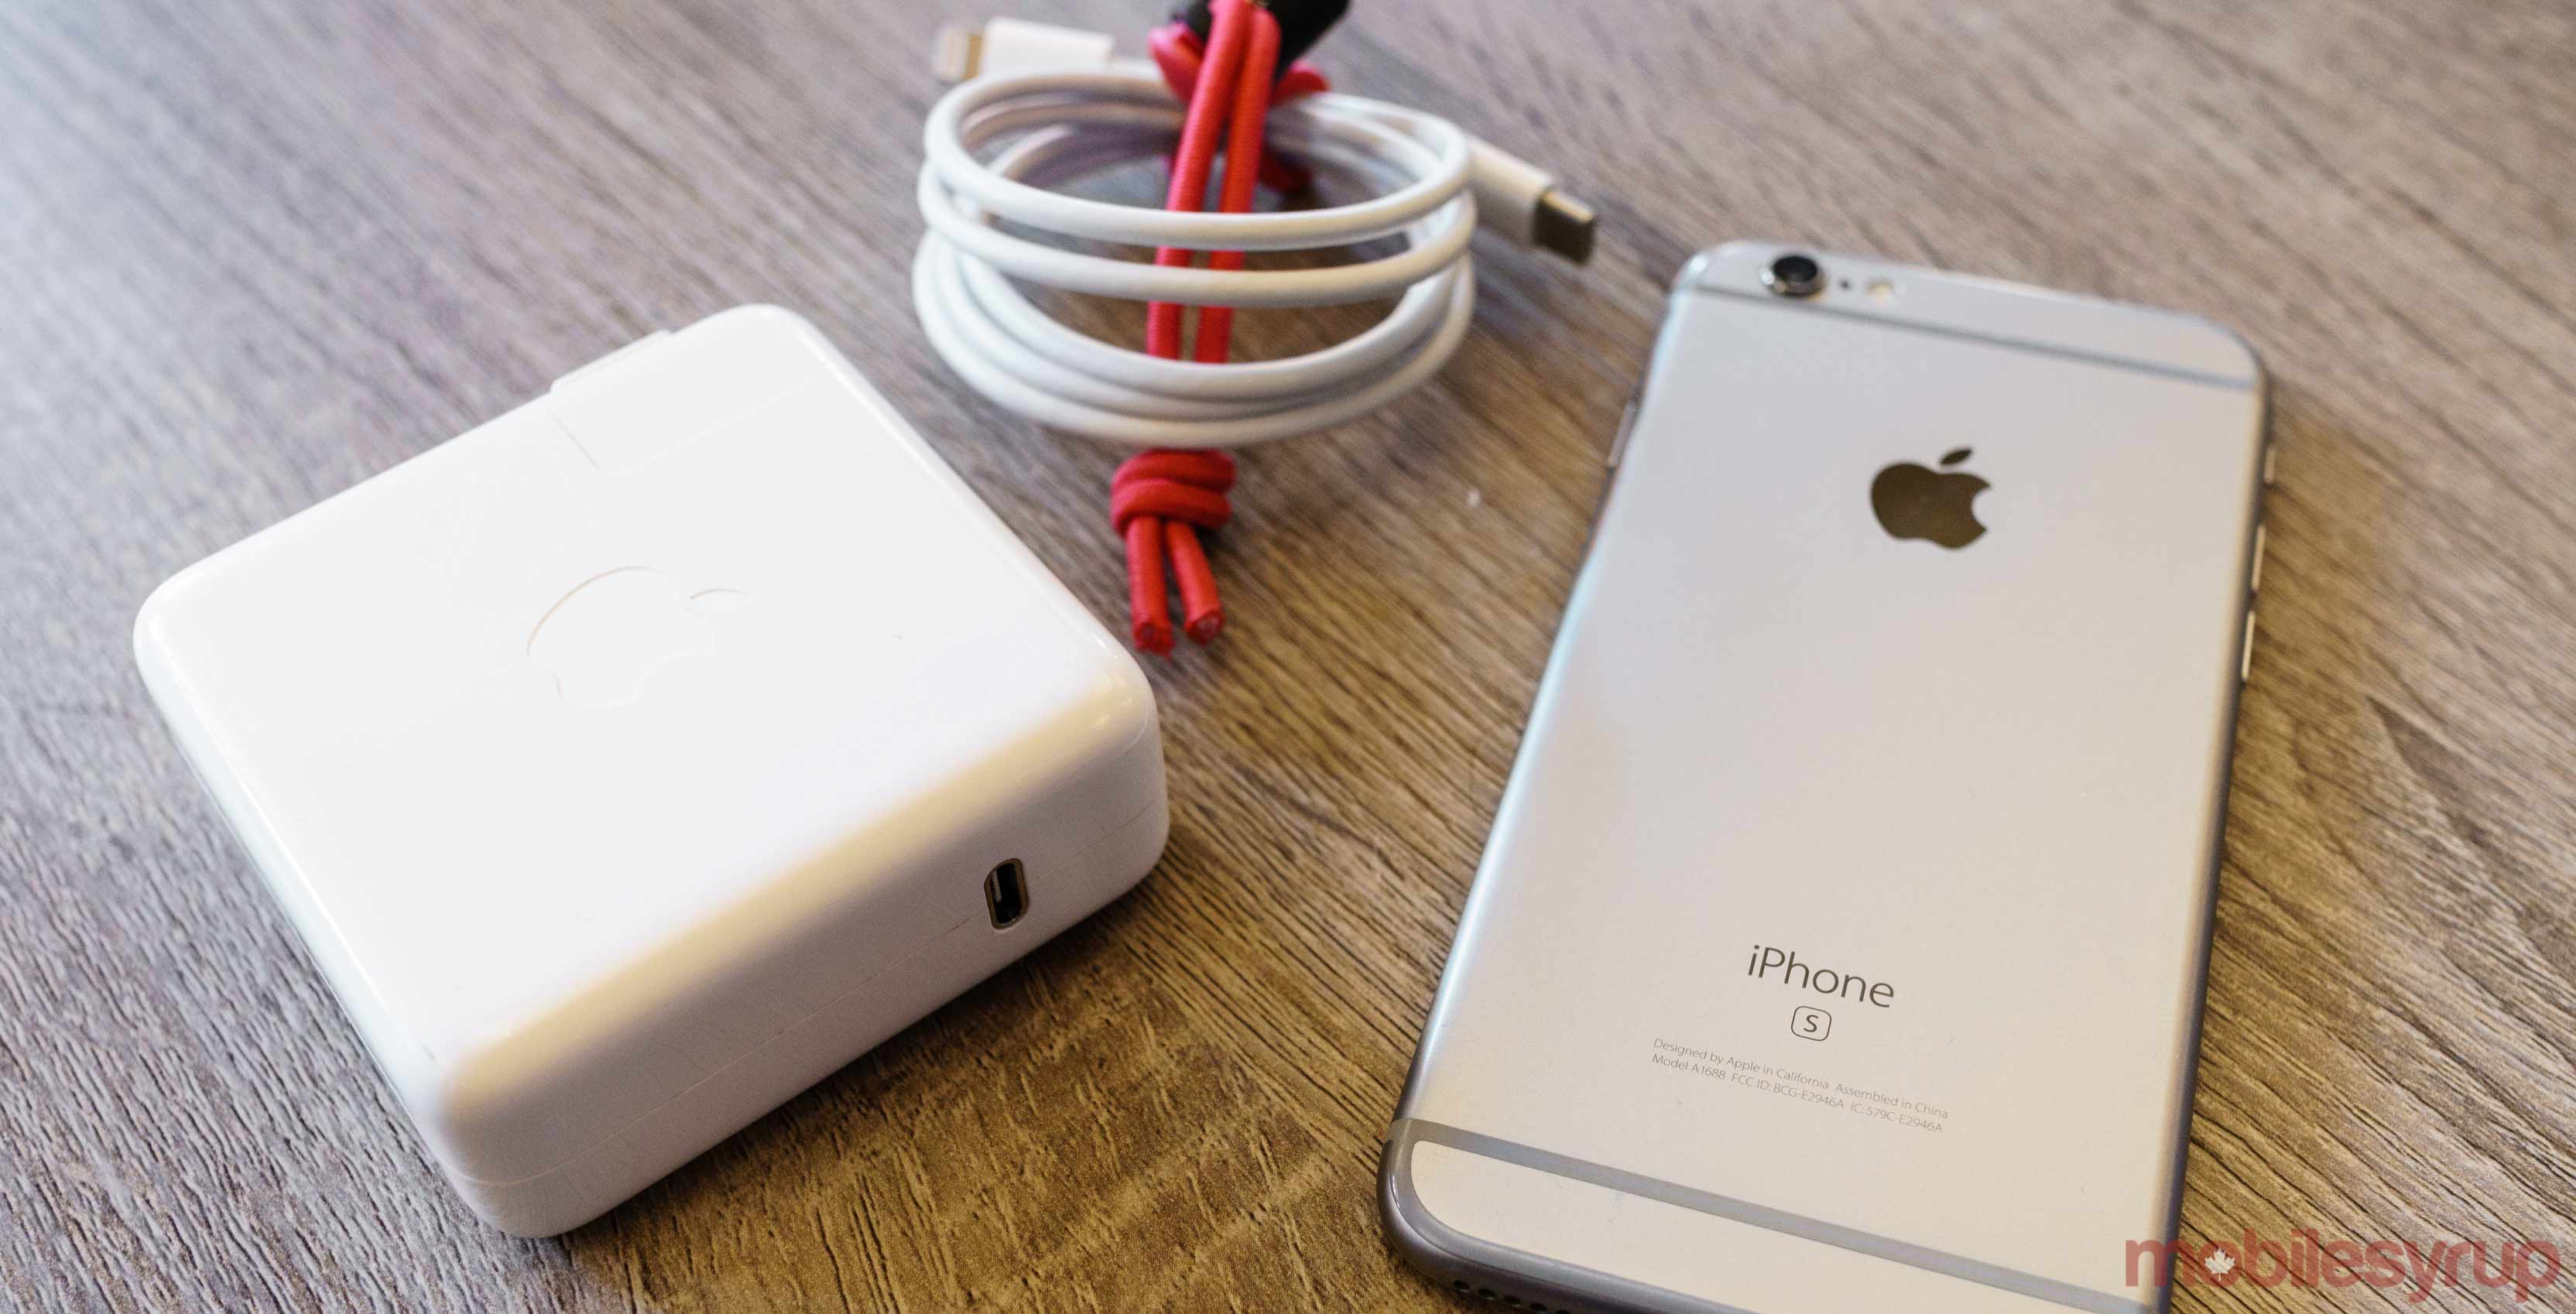 All the components you'll need to fast charge your iPhone 8